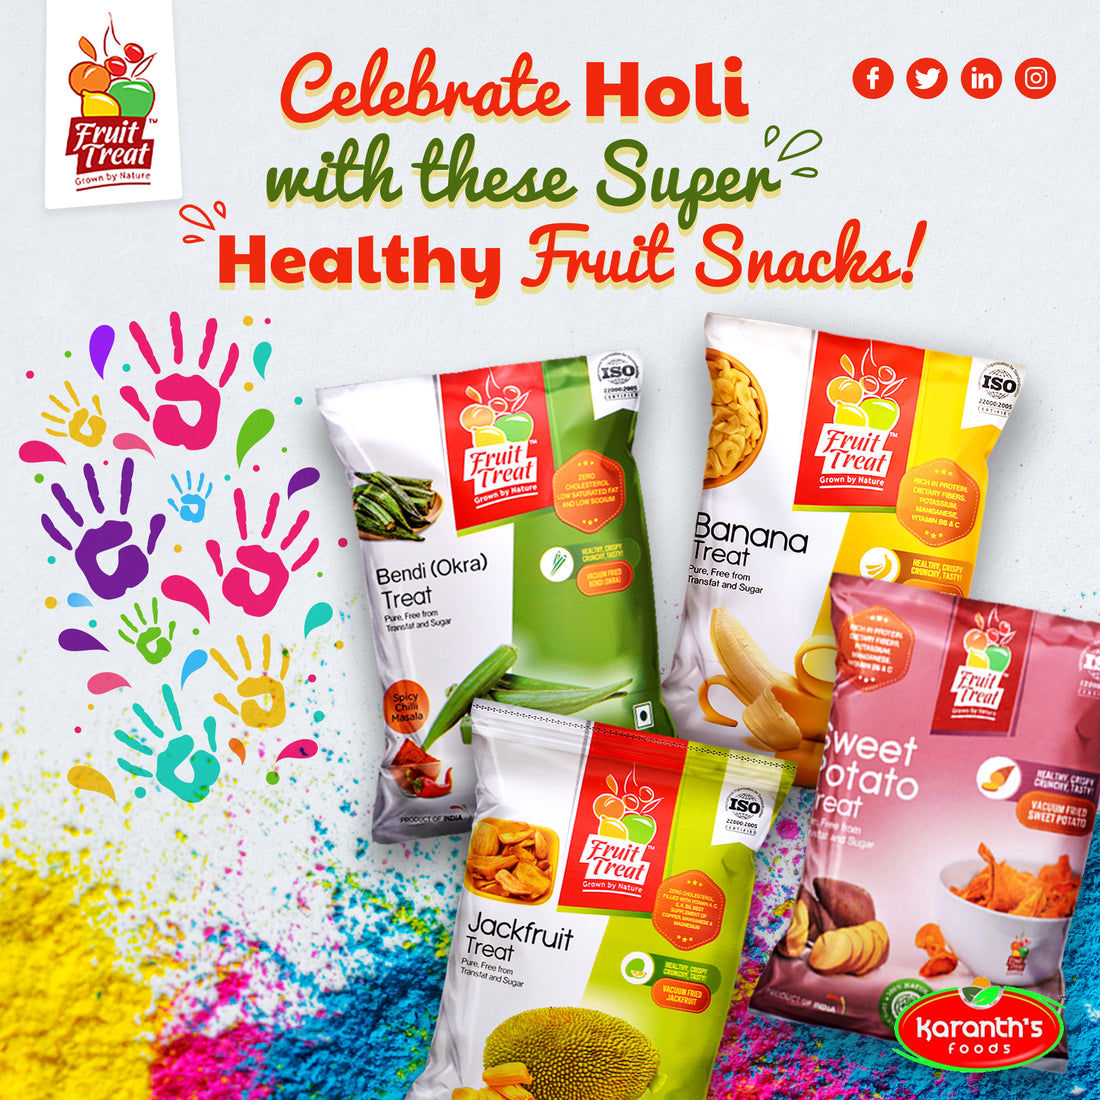 Celebrate Holi with these Super Healthy Fruit Snacks!